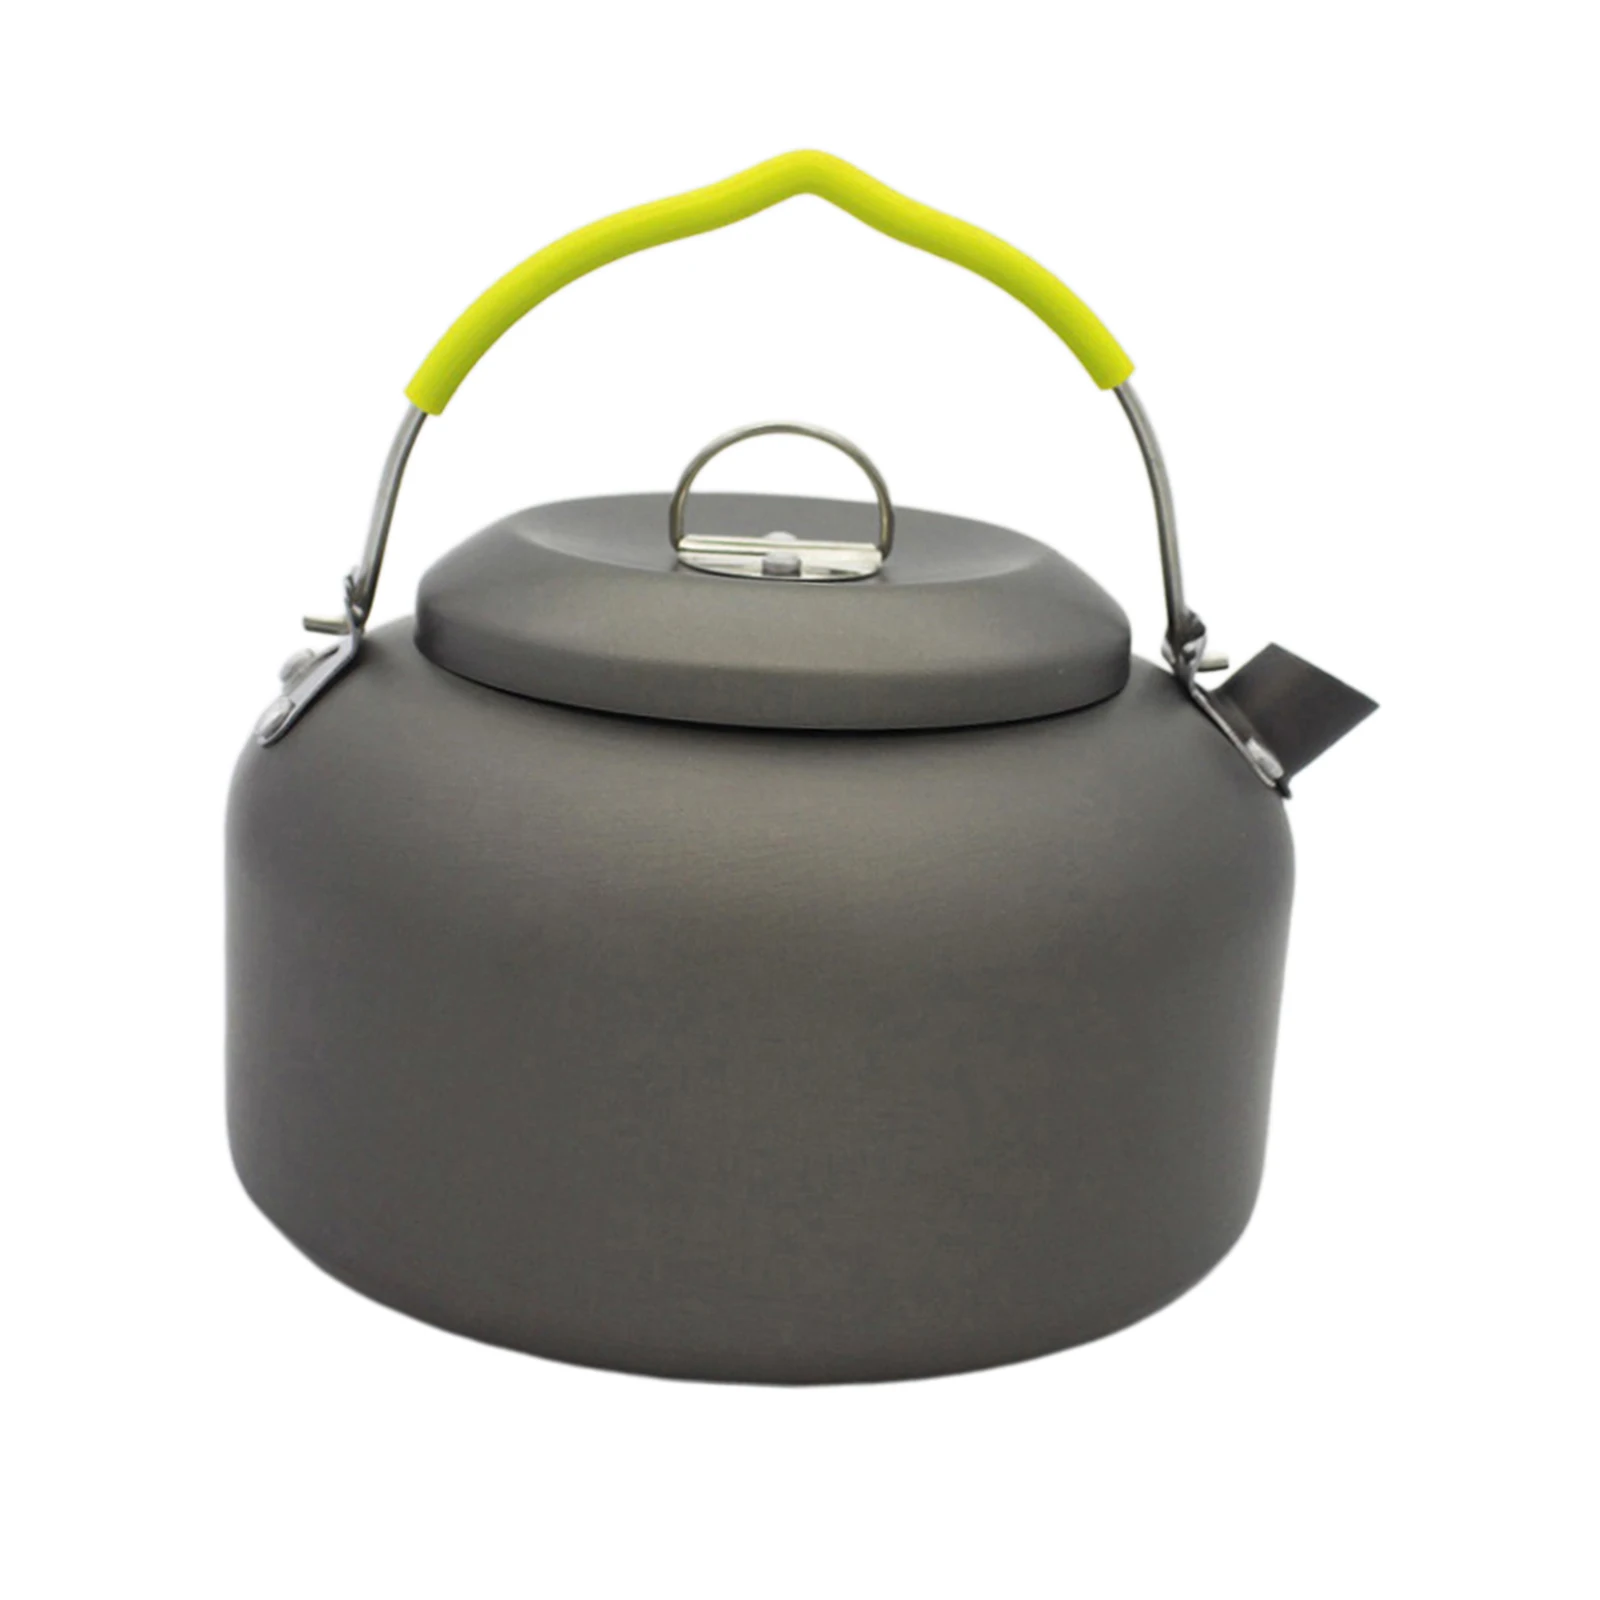 Camping Water Kettle Outdoor Portable Teapot Coffee Pot Open Fire Cookware for Hiking Camping Travel Picnice for Boiling Water